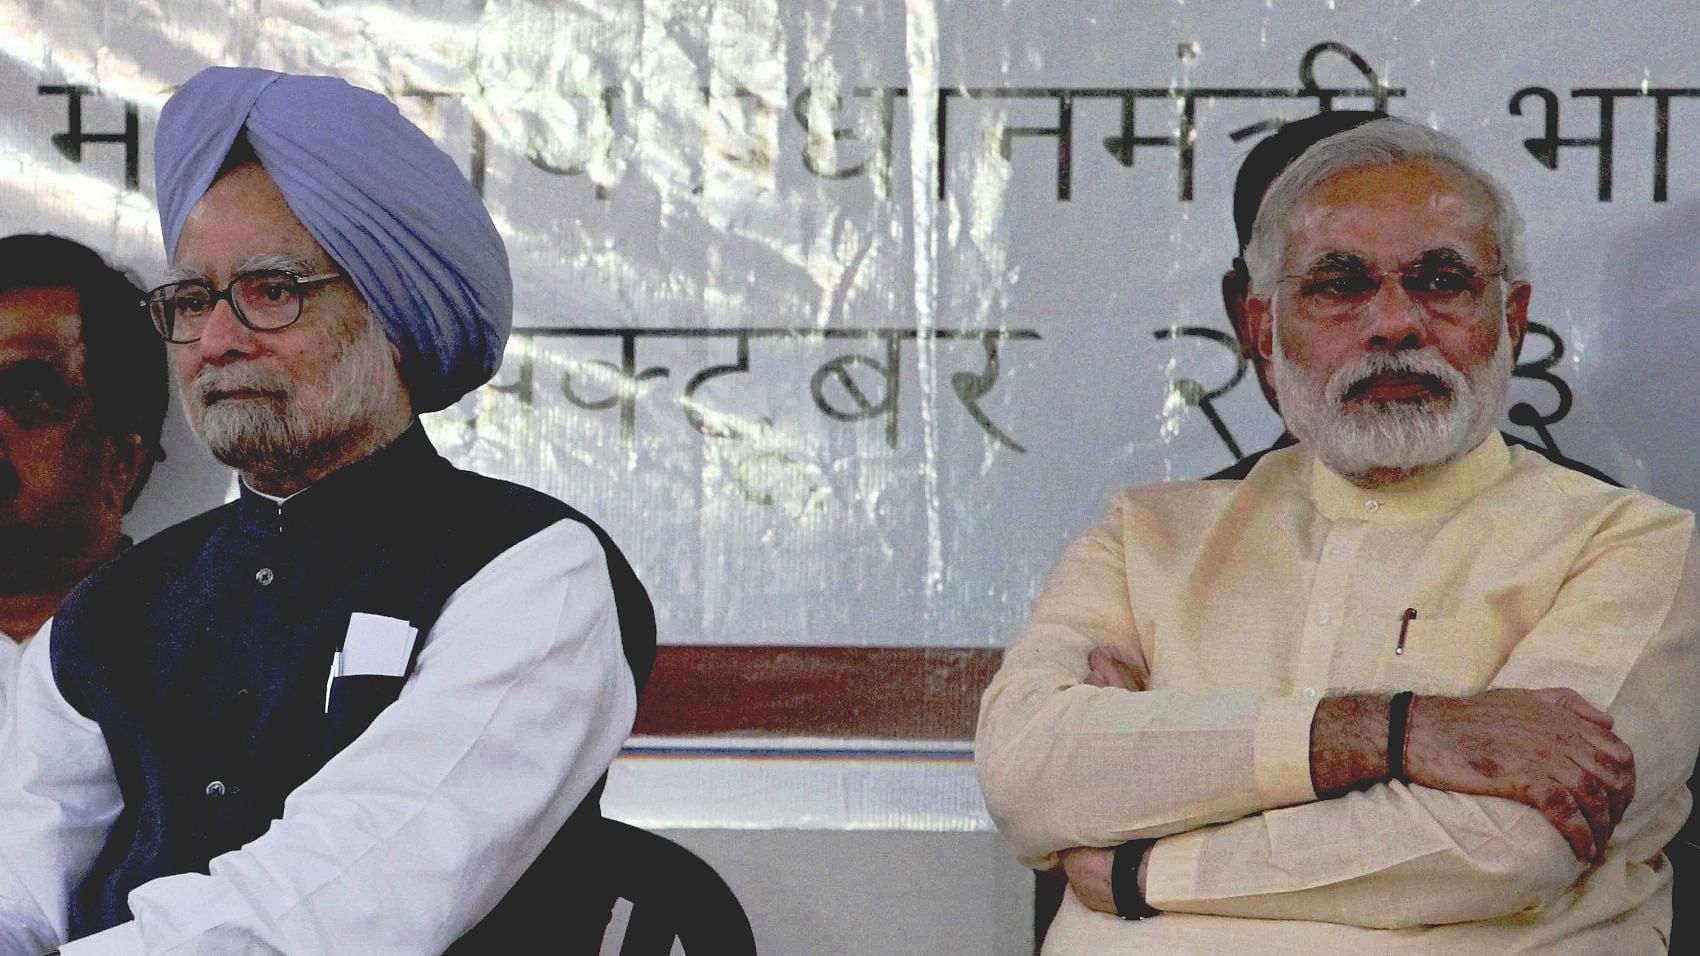 pm narendra modi's 8 years: how he has performed compared to manmohan singh | flipboard